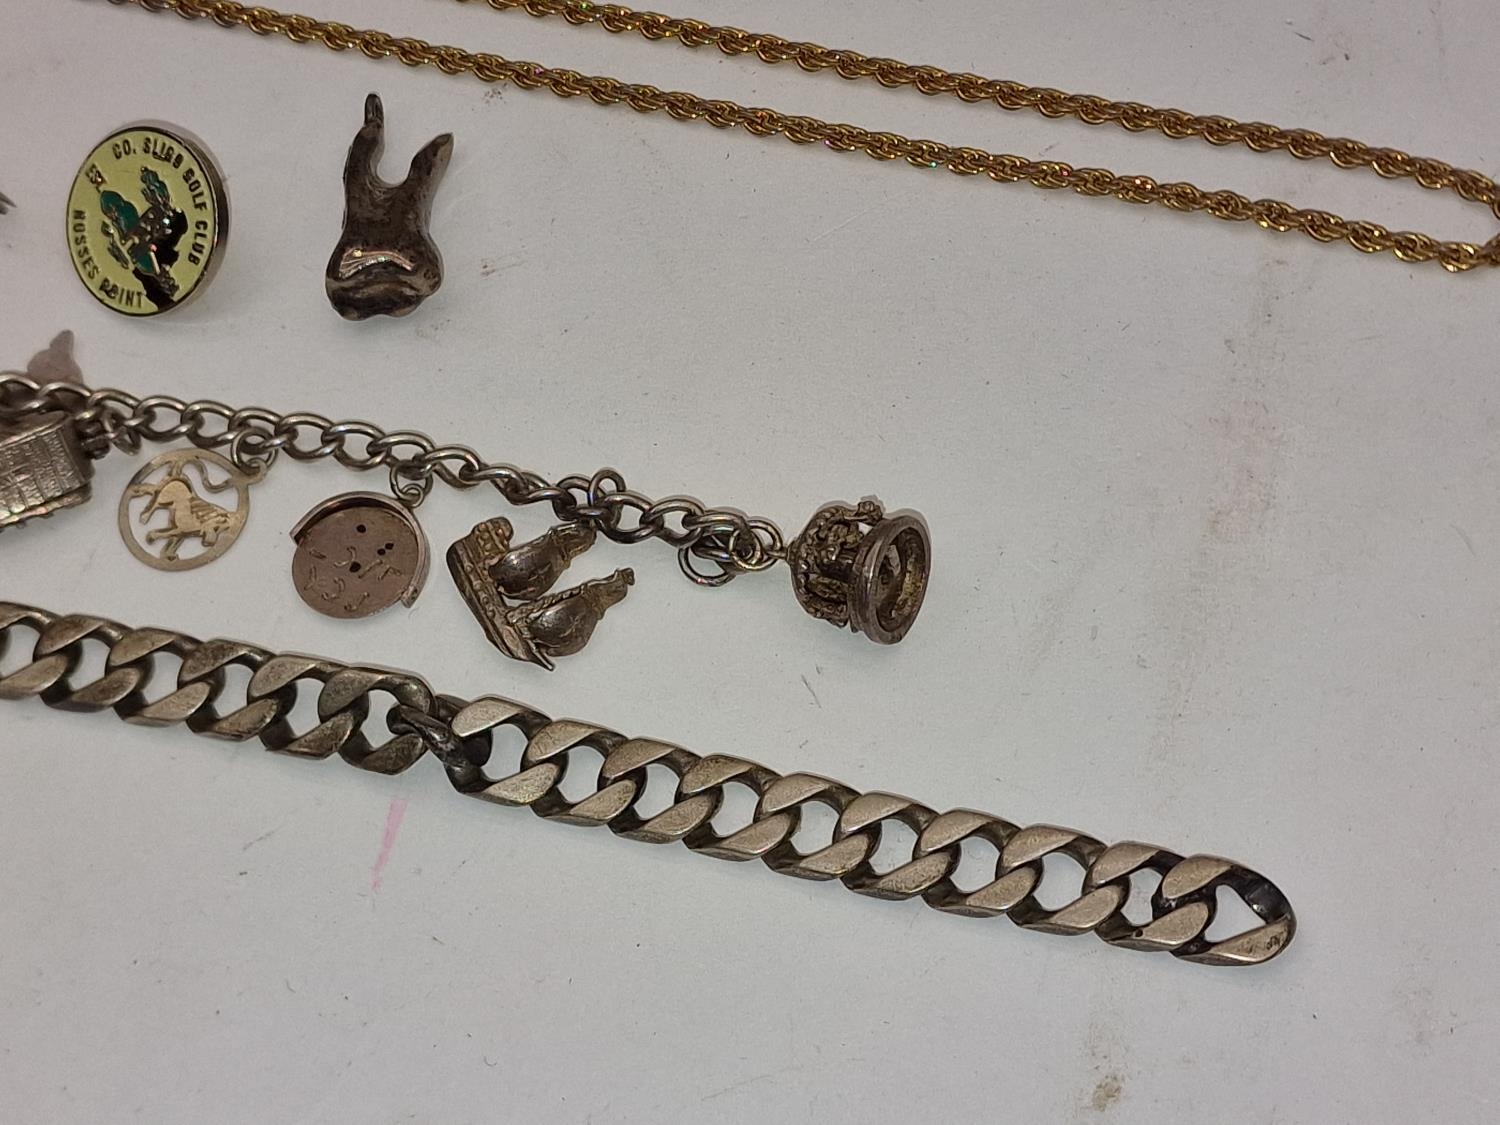 Silver charm bracelet and charms (10) together a flat link bracelet and other collectable jewellery - Image 3 of 3